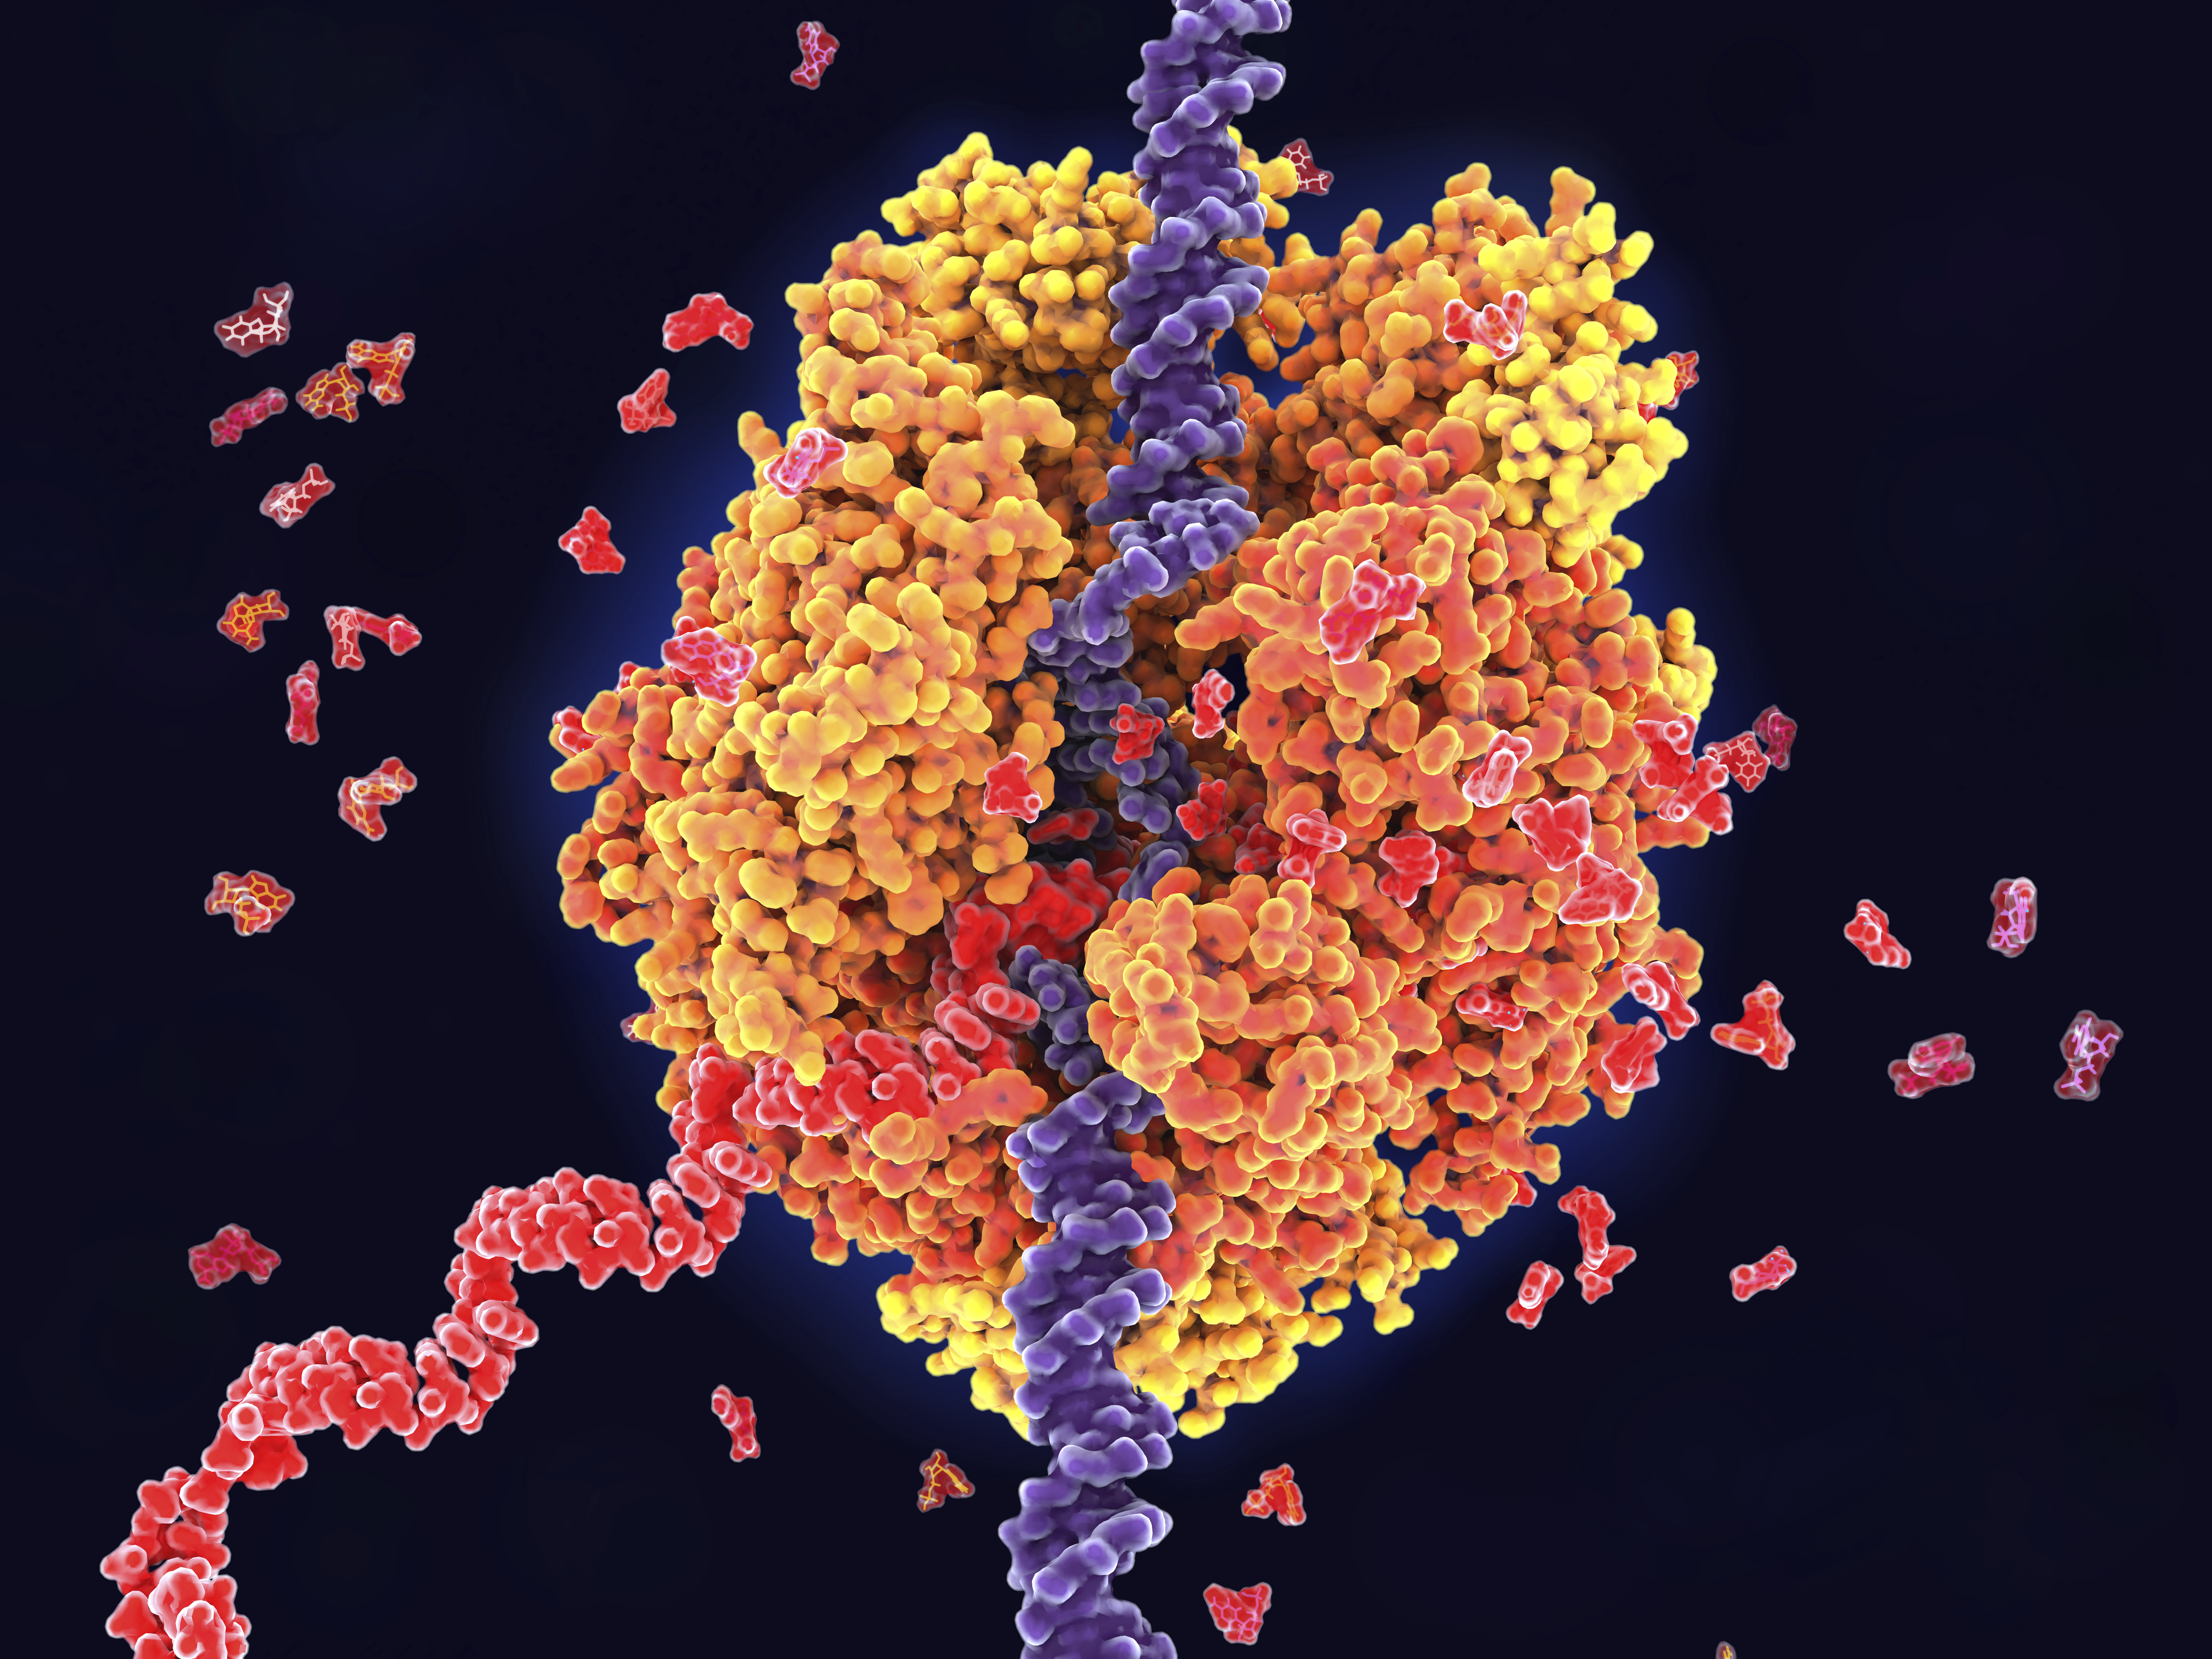 Illustration of RNA polymerase II in action in yeast. RNA (ribonucleic acid) polymerase II (orange) functions in the nucleus in the process of transcription. It unwinds the DNA (deoxyribonucleic acid) double helix (violet), and uses its nucleotide sequence as a template to produce a strand of complementary messenger ribonucleic acid (mRNA, red). RNA polymerase II recognises a start sign on the DNA strand and then moves along the strand building the mRNA until it reaches a termination signal. This single-stranded mRNA will subsequently be translated in the cytoplasm to produce a particular protein.